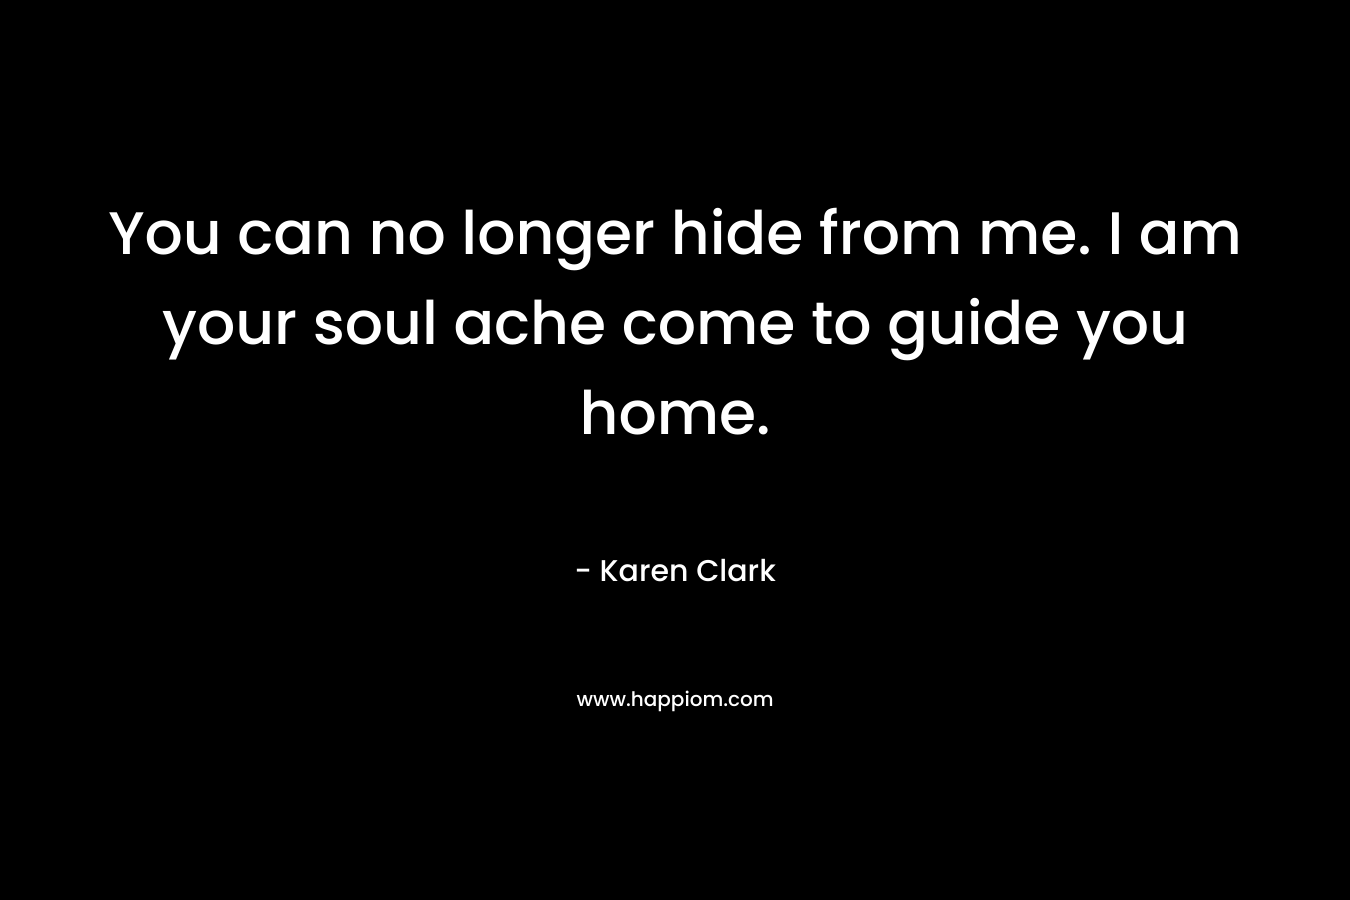 You can no longer hide from me. I am your soul ache come to guide you home.